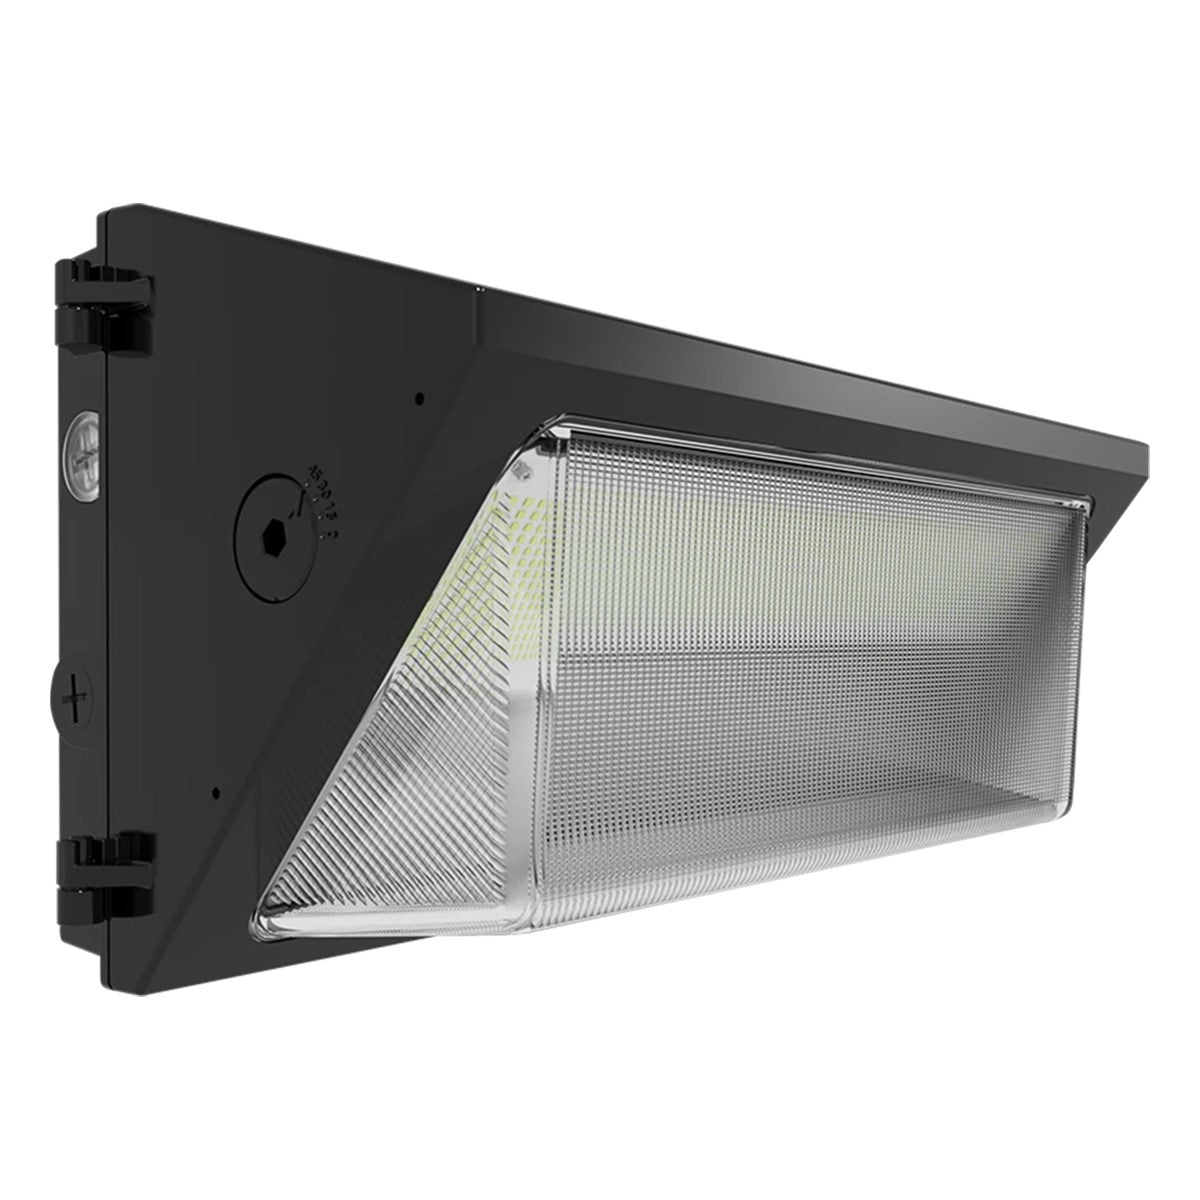 LED Standard Wall Pack With Photocell, 21000 Lumens, 75-150 Adjustable Wattage, Selectable CCT 30K/40K/50K, 120/277V, Adjustable Throw - Bees Lighting